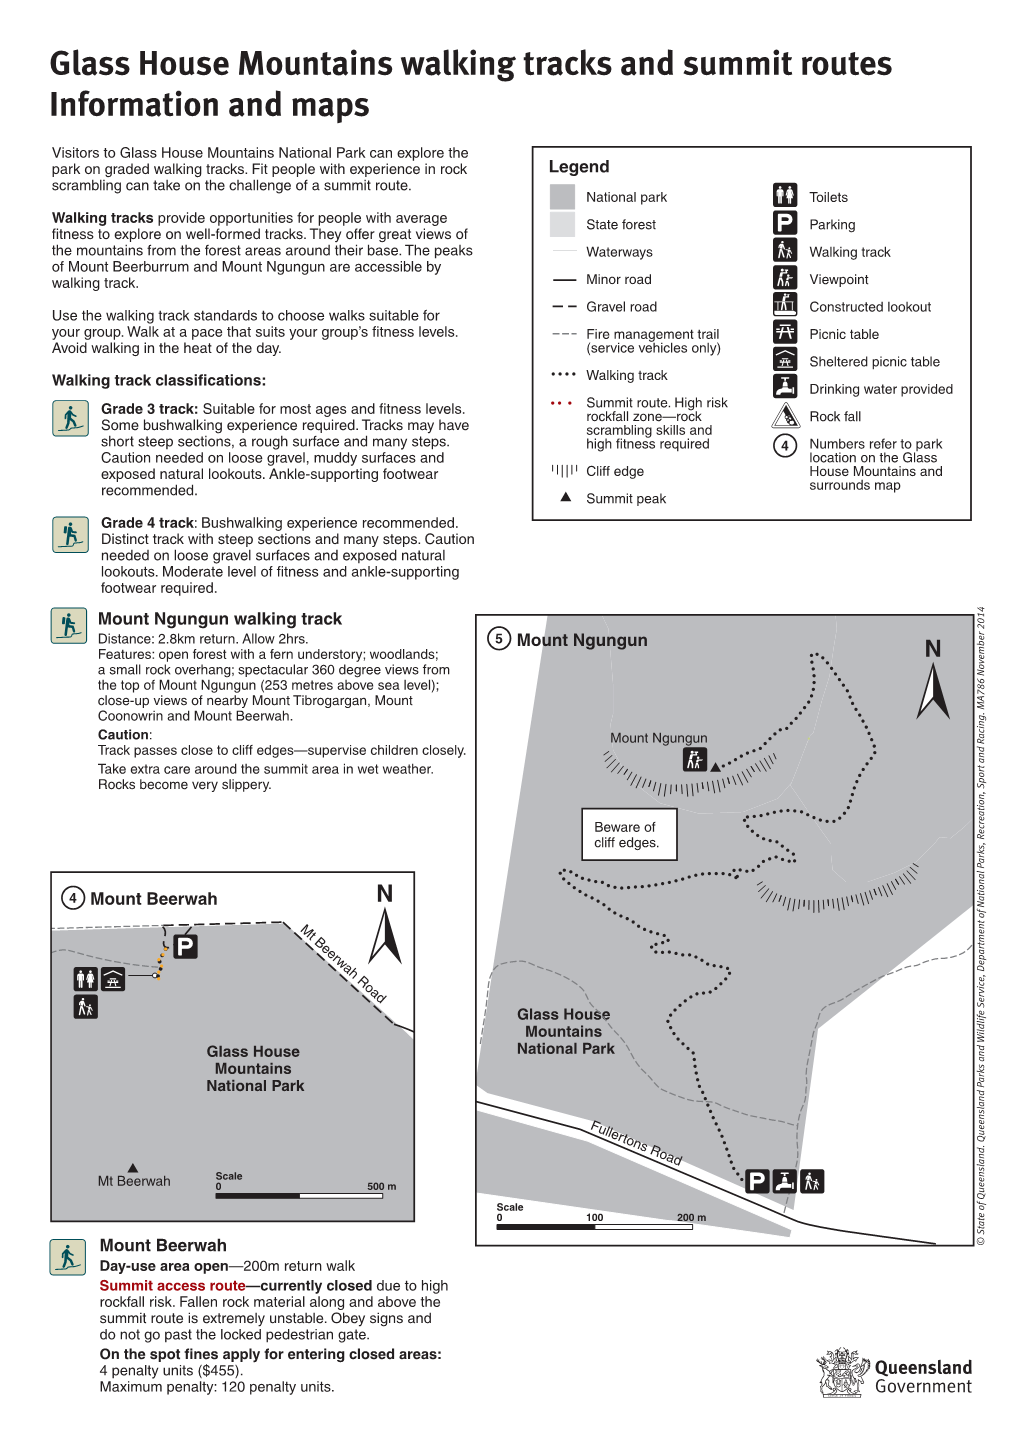 Glass House Mountains Walking Tracks And Summit Routes Information And Maps 